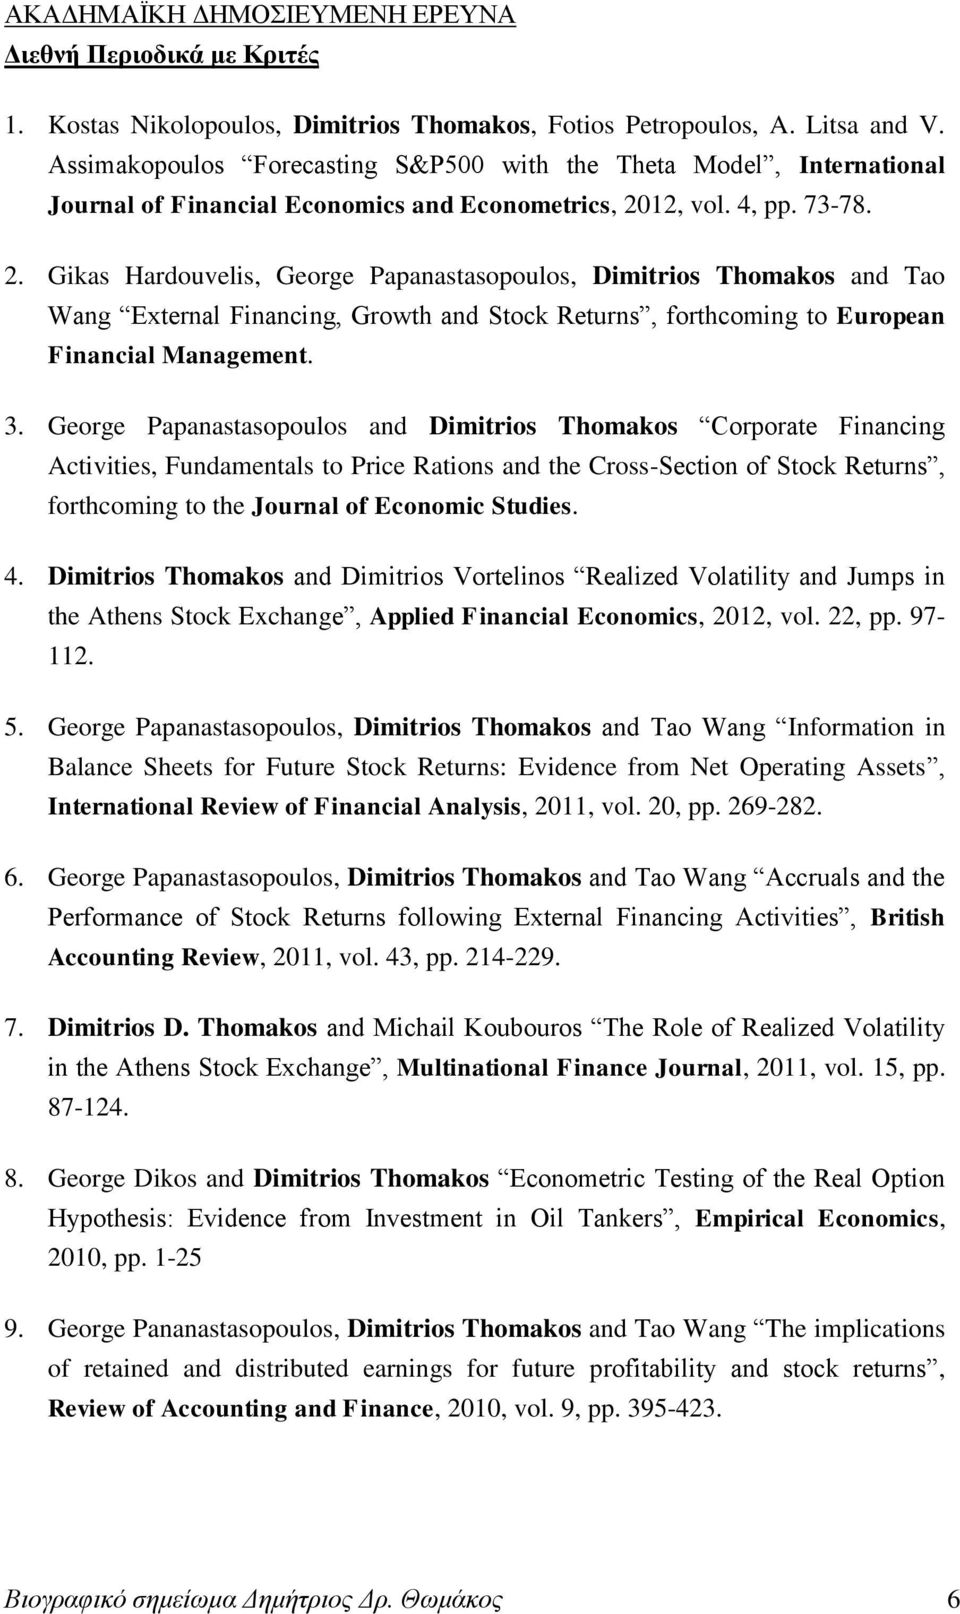 12, vol. 4, pp. 73-78. 2. Gikas Hardouvelis, George Papanastasopoulos, Dimitrios Thomakos and Tao Wang External Financing, Growth and Stock Returns, forthcoming to European Financial Management. 3.